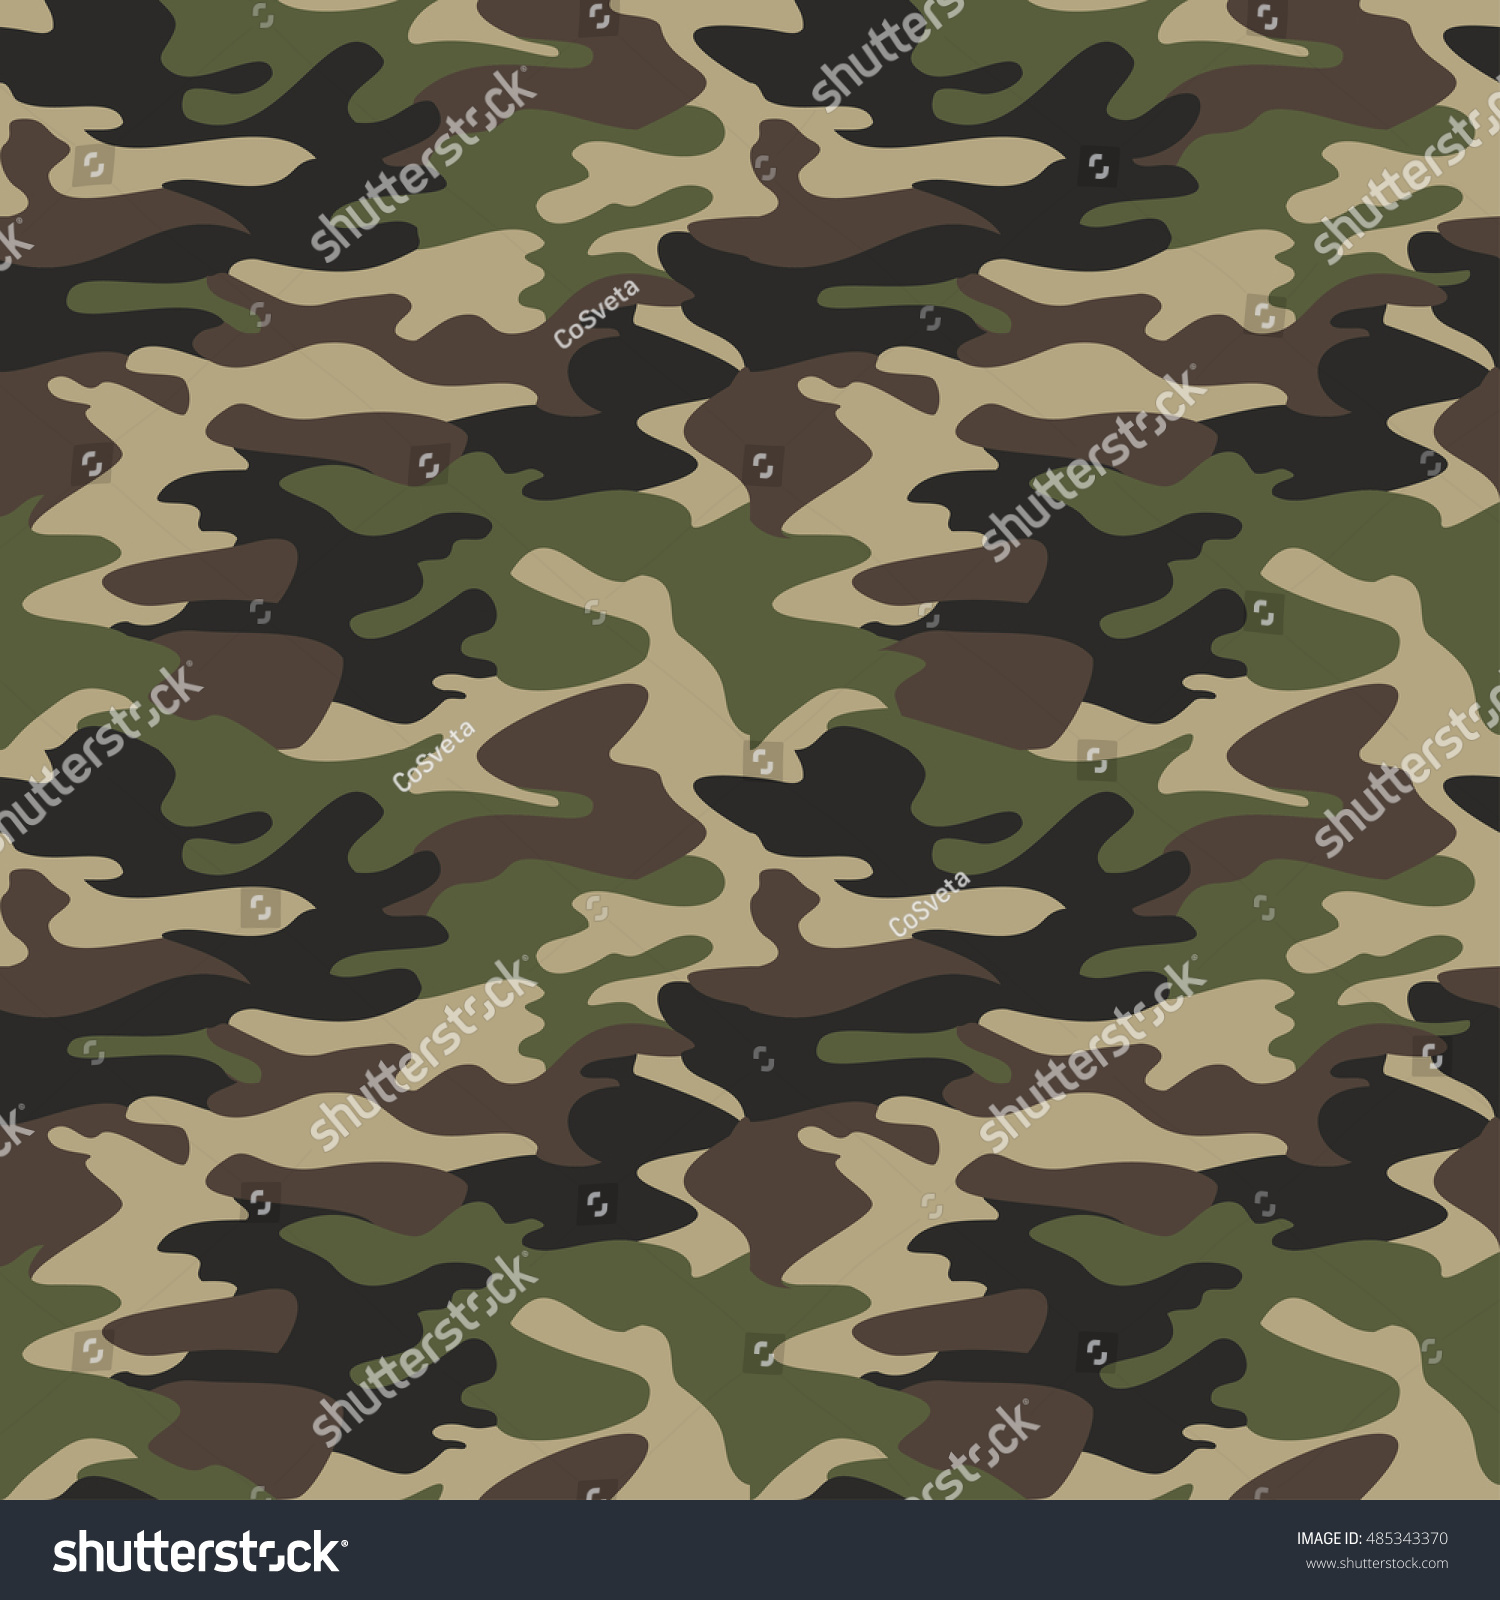 SVG of Camouflage pattern background seamless vector illustration. Classic clothing style masking camo repeat print. Green brown black olive colors forest texture svg